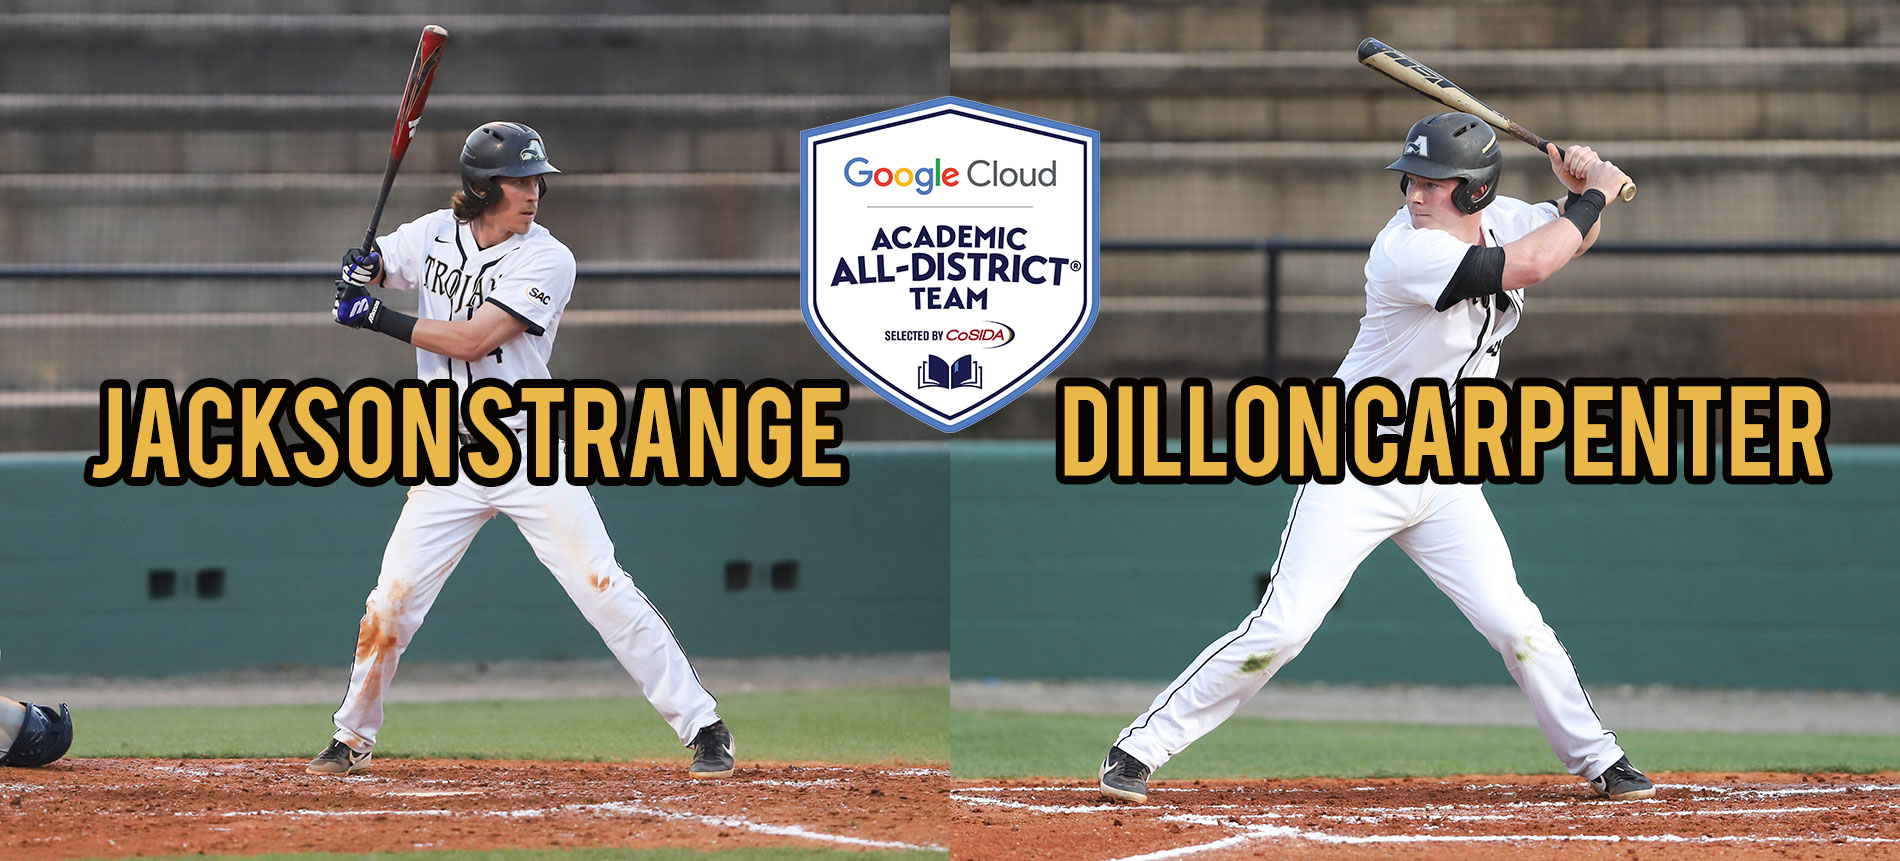 Jackson Strange and Dillon Carpenter Earn Academic All-District Honors